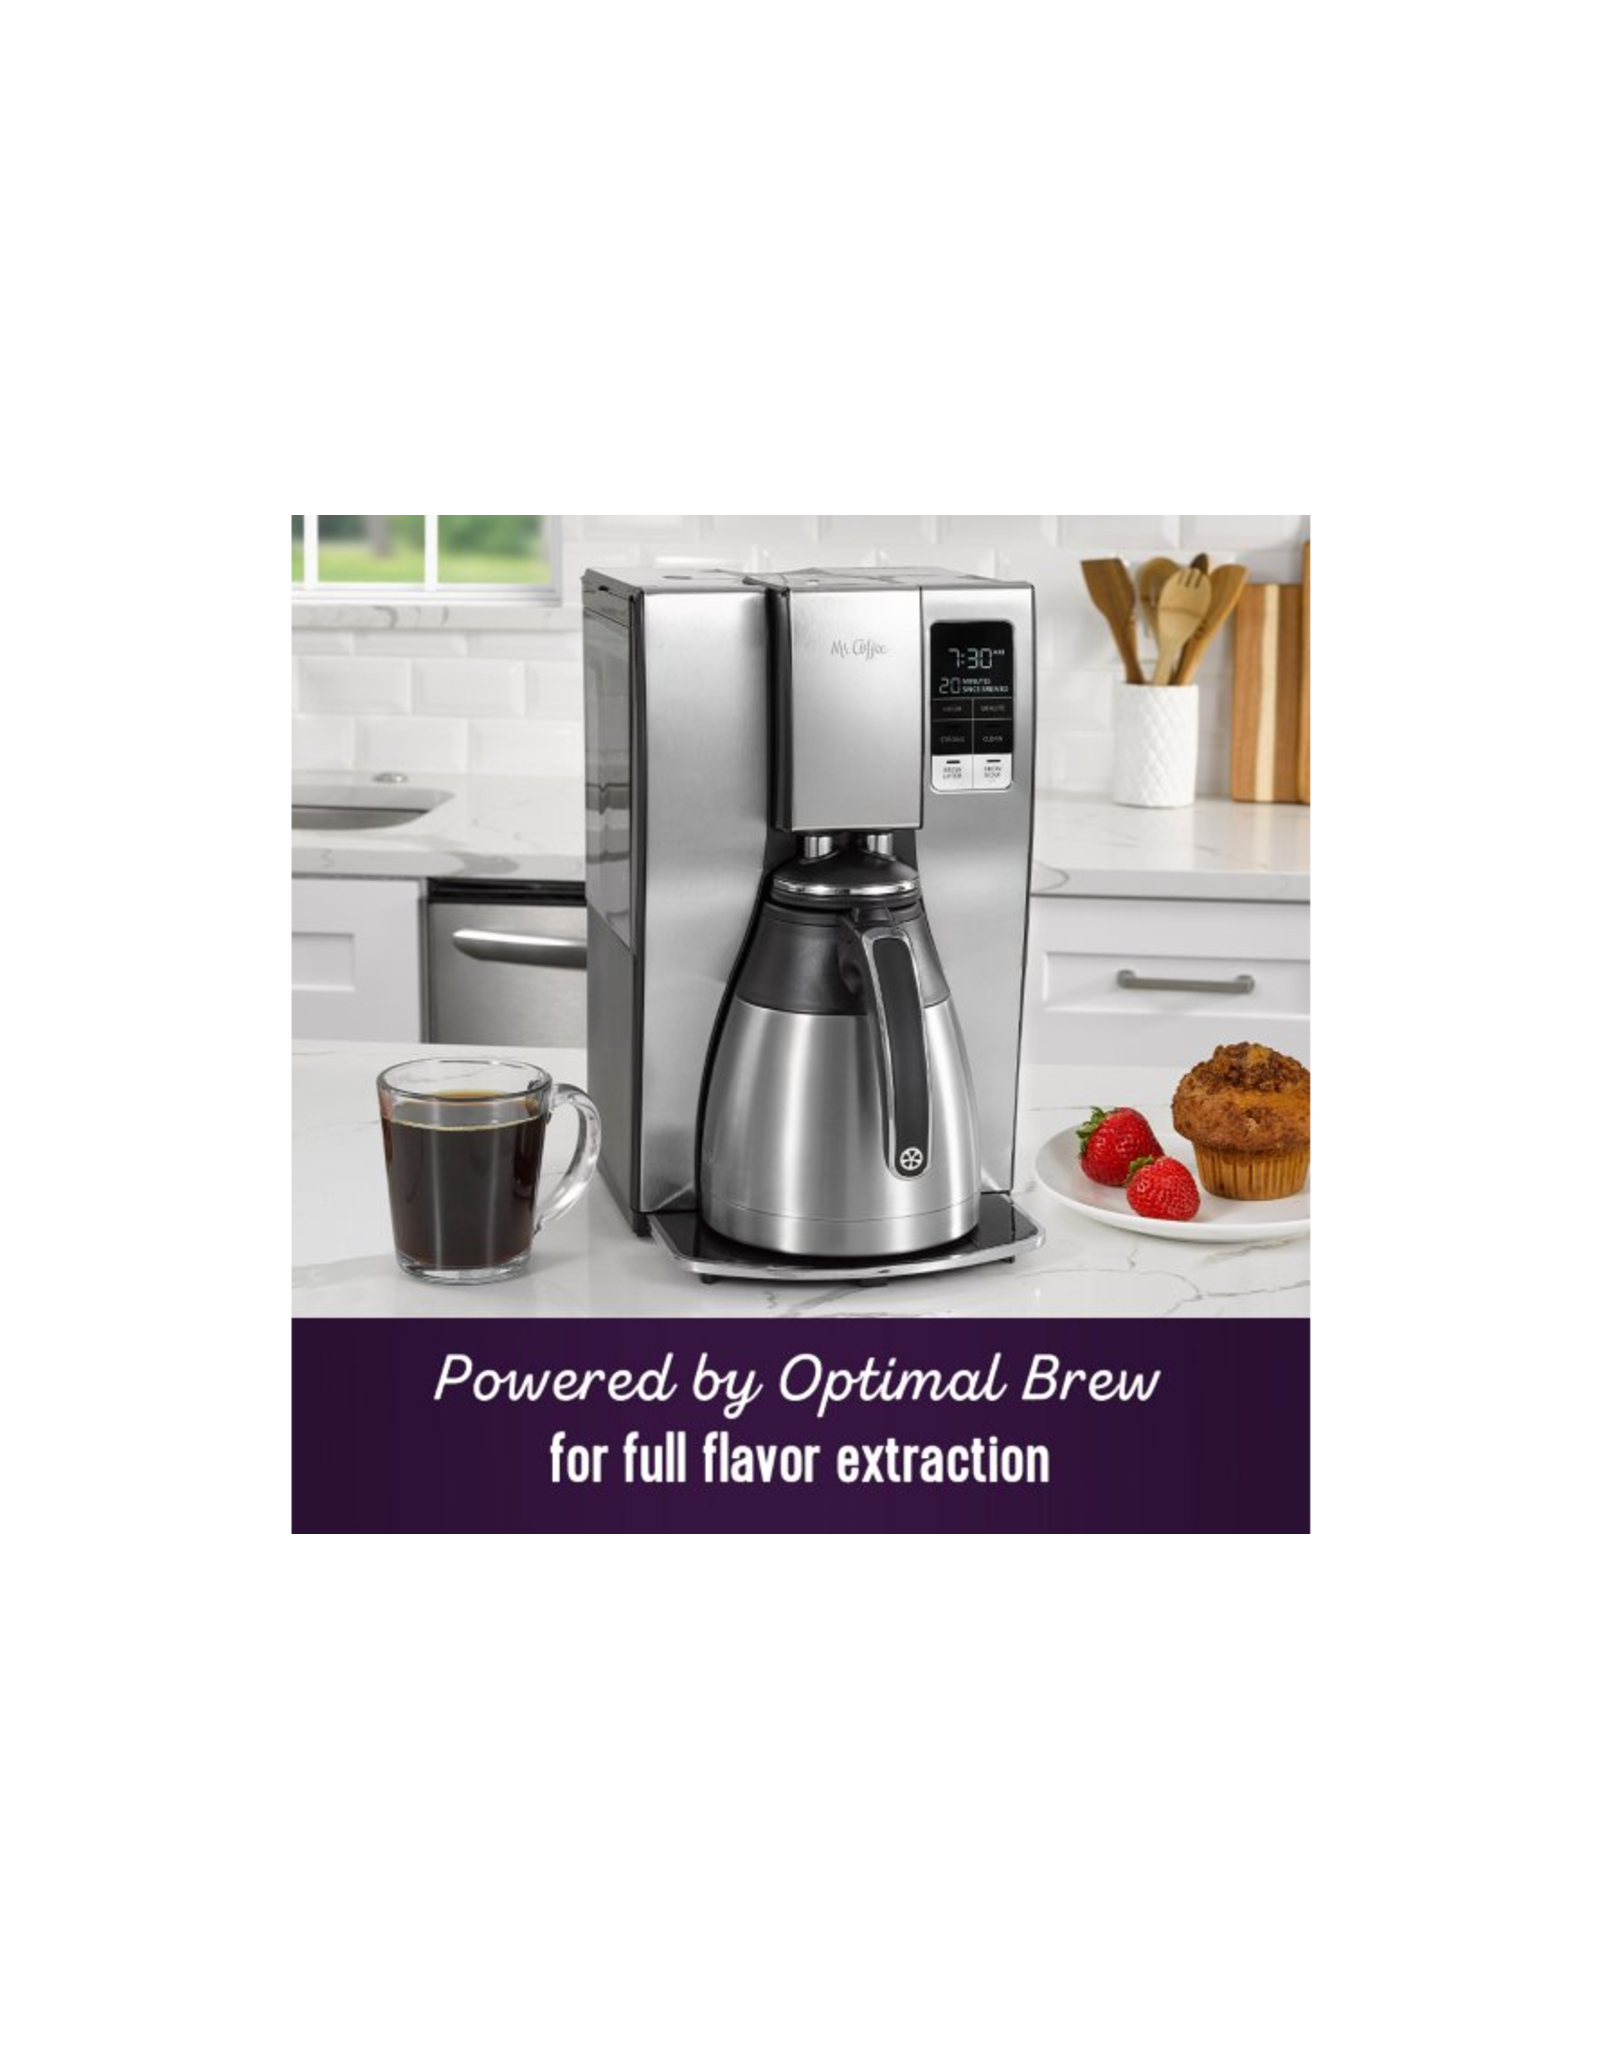 2121469 Mr. Coffee - Space-Saving Combo 10-Cup Coffee Maker and Pod Single  Serve Brewer - Stainless-Steel/Black - Black Friday